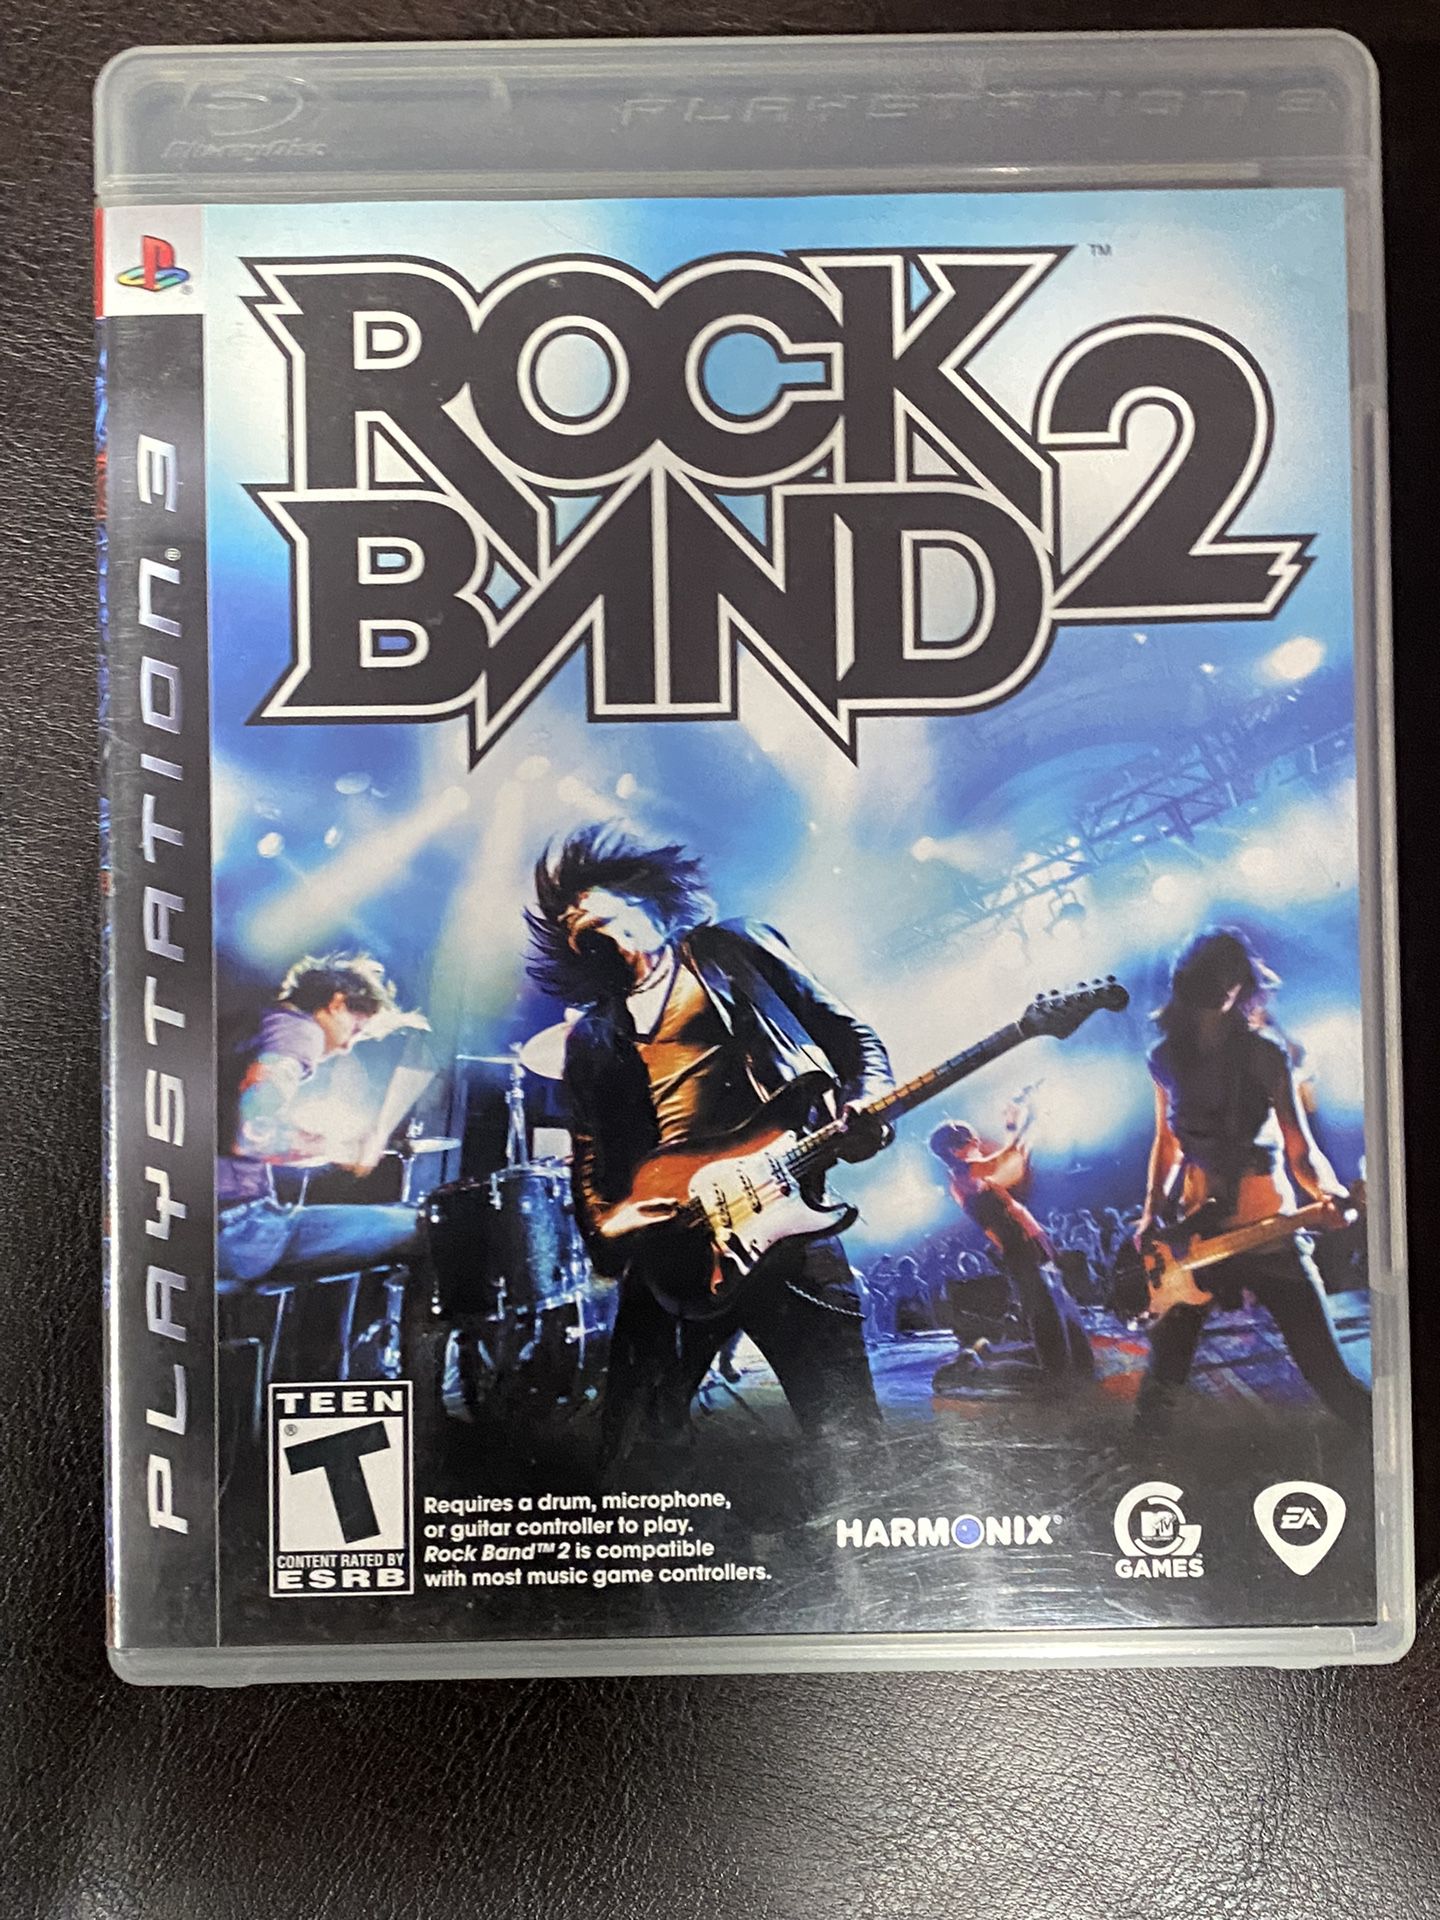 Rock Band 2 Ps2 Game